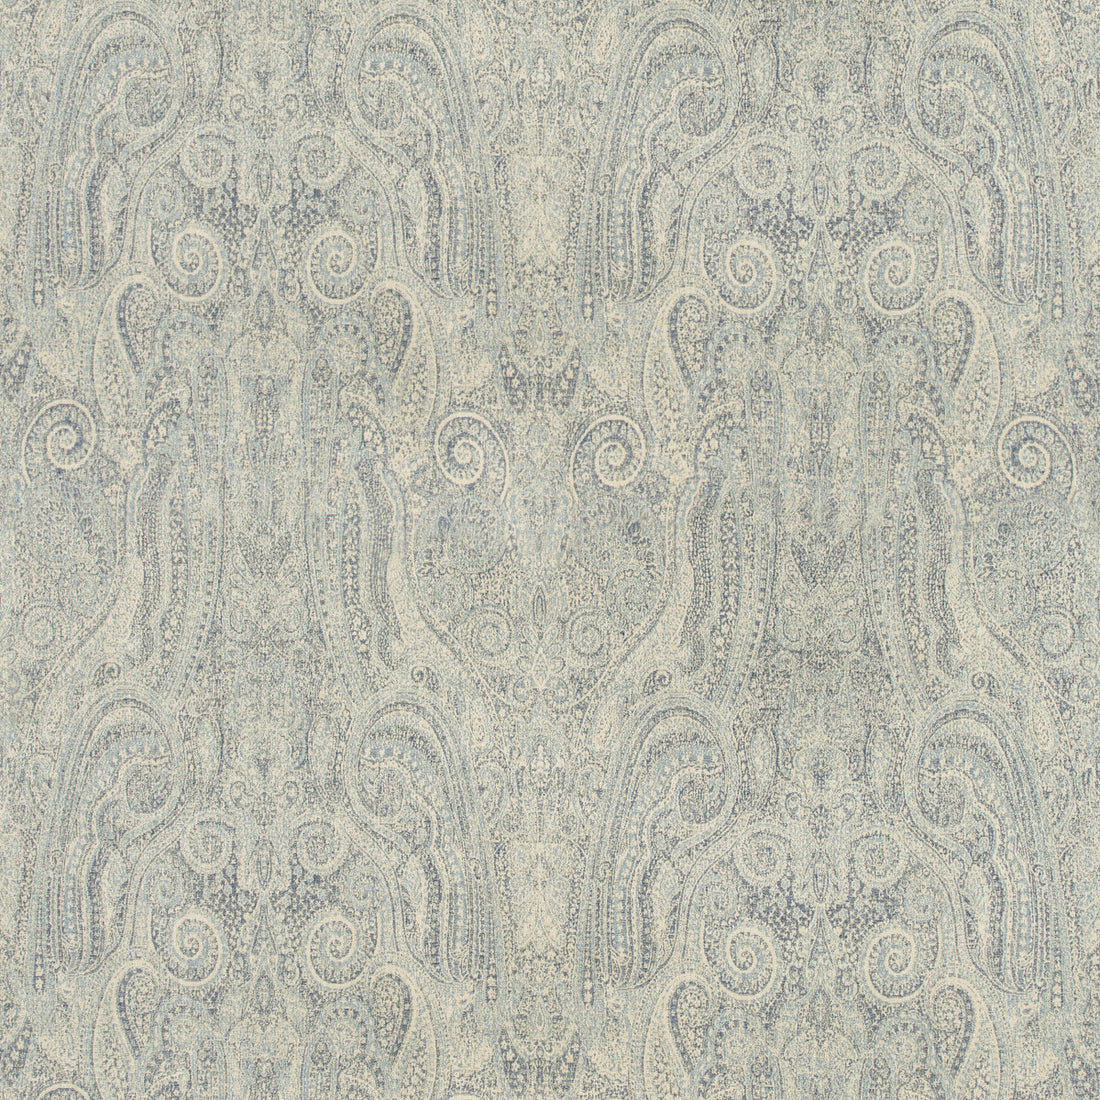 Foxhill Paisley fabric in denim color - pattern 2019112.505.0 - by Lee Jofa in the Manor House collection